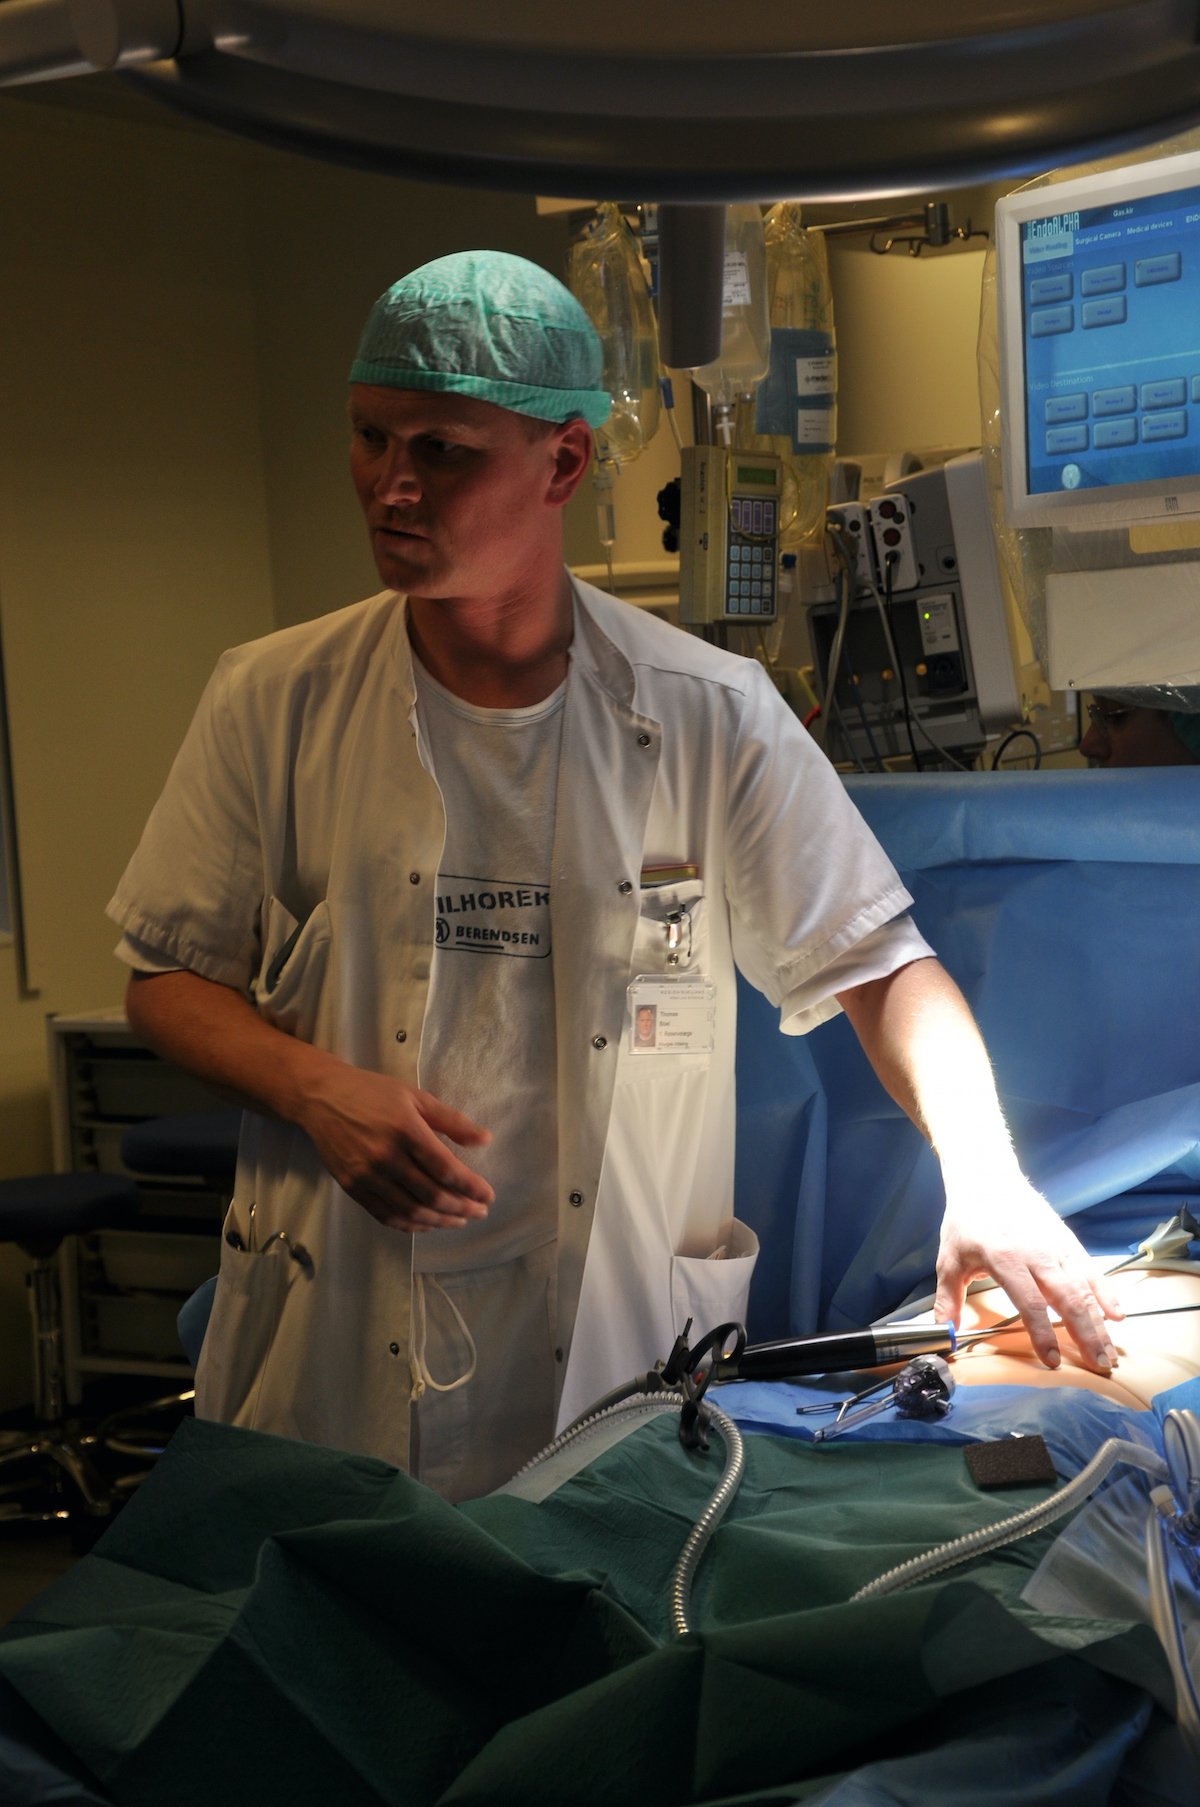 Surgeon illustrates the many functions of the new operating theatres